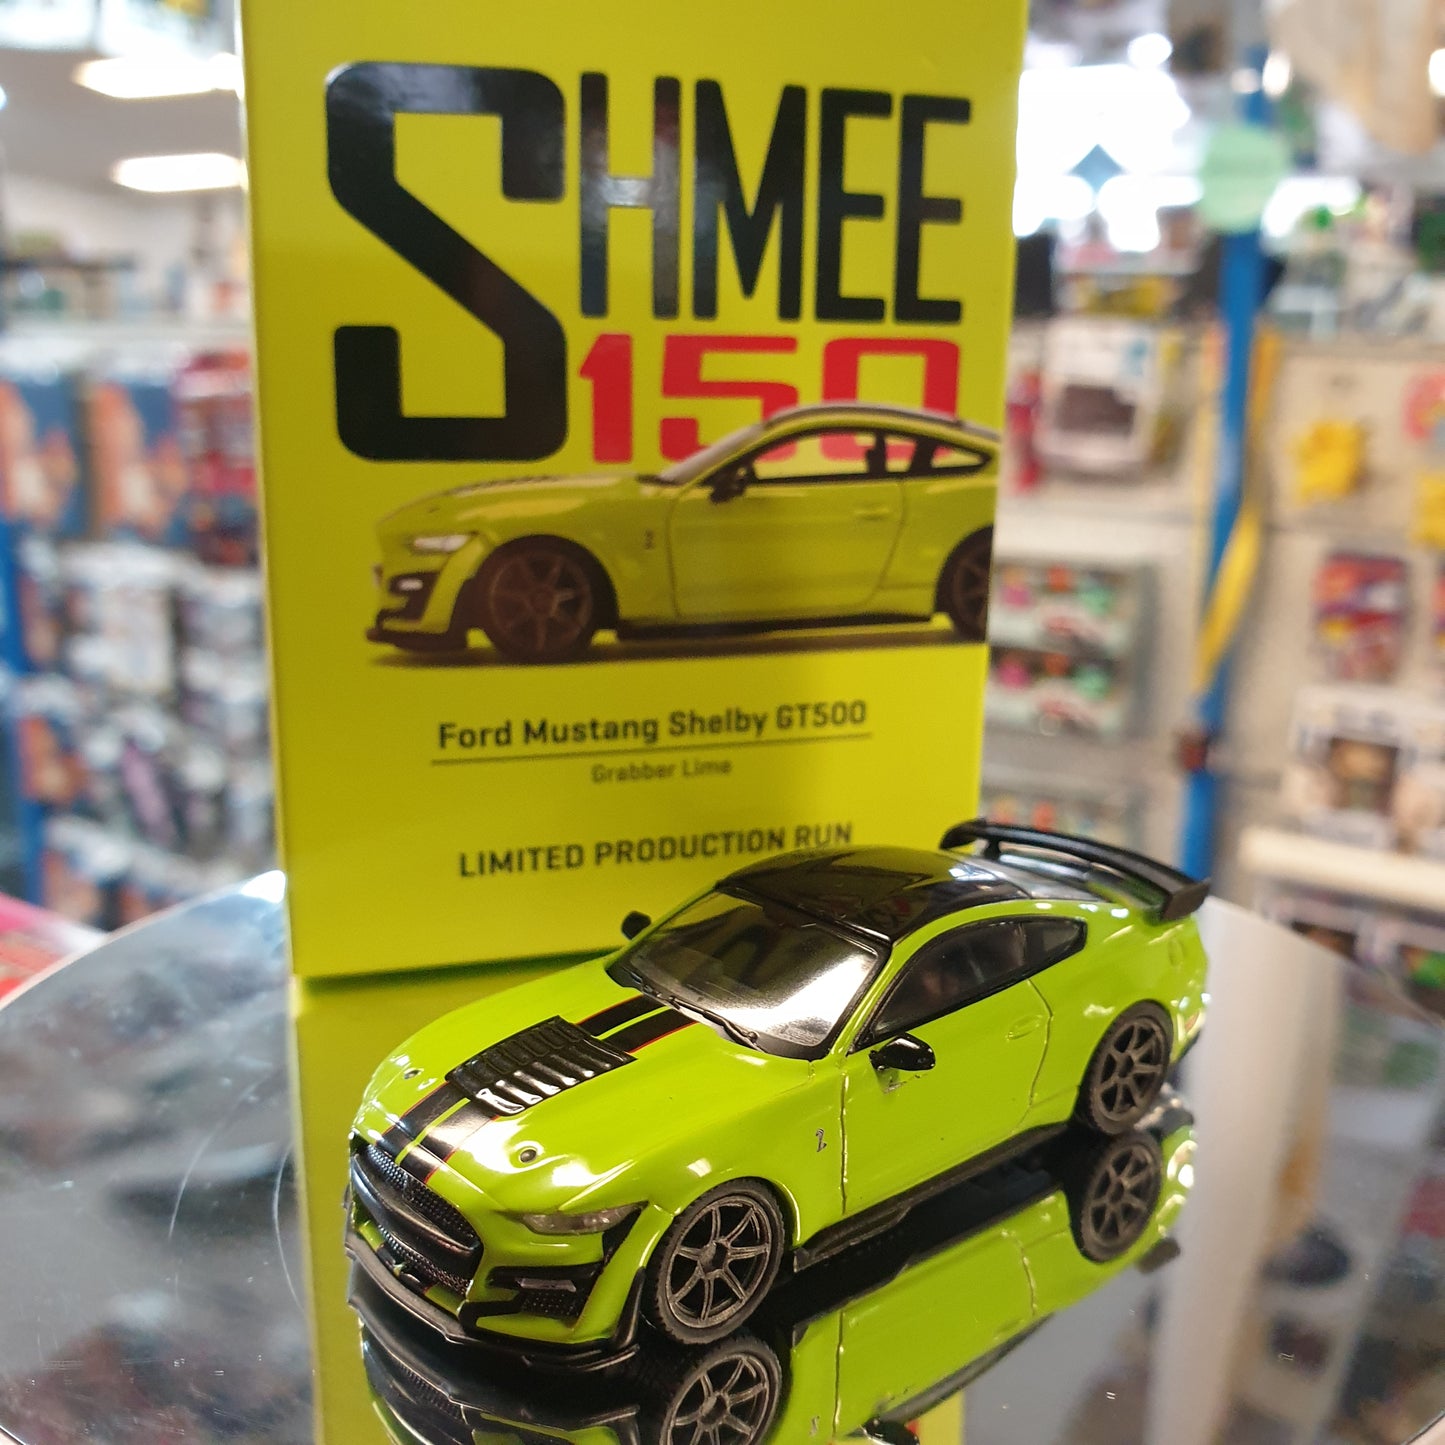 Tarmac Works / MiniGT - Ford Mustang Shelby GT500 'Shmee150' - Grabber Lime